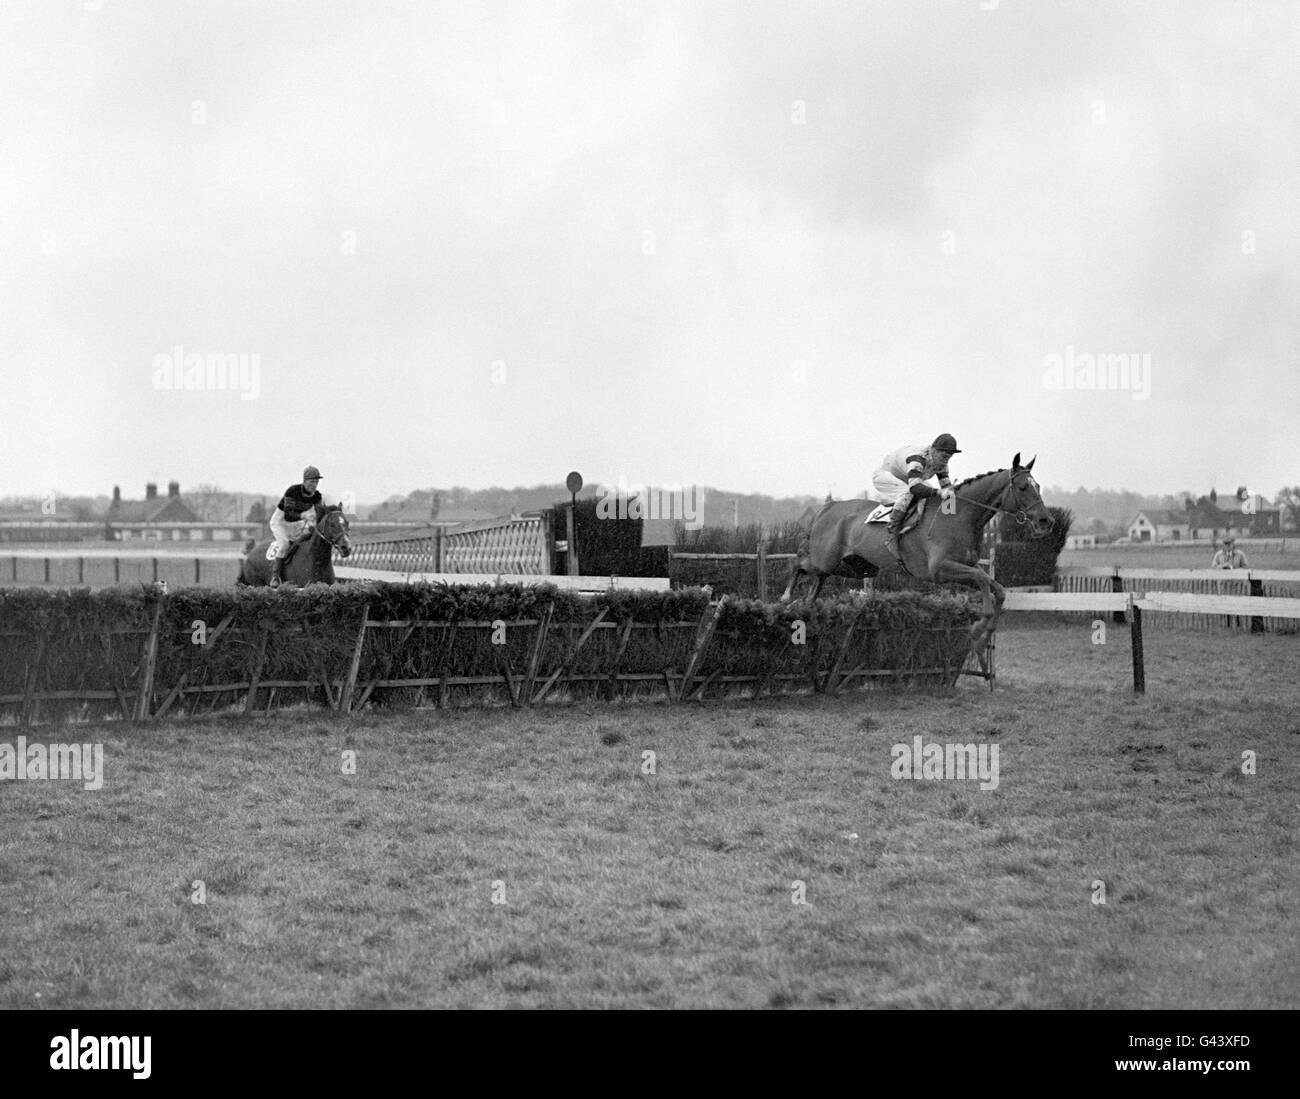 The winner 'Sea Sence', P.Supple up (first name not known) is clear of the second placed horse 'Blind Approach', Bill Rees up. Stock Photo